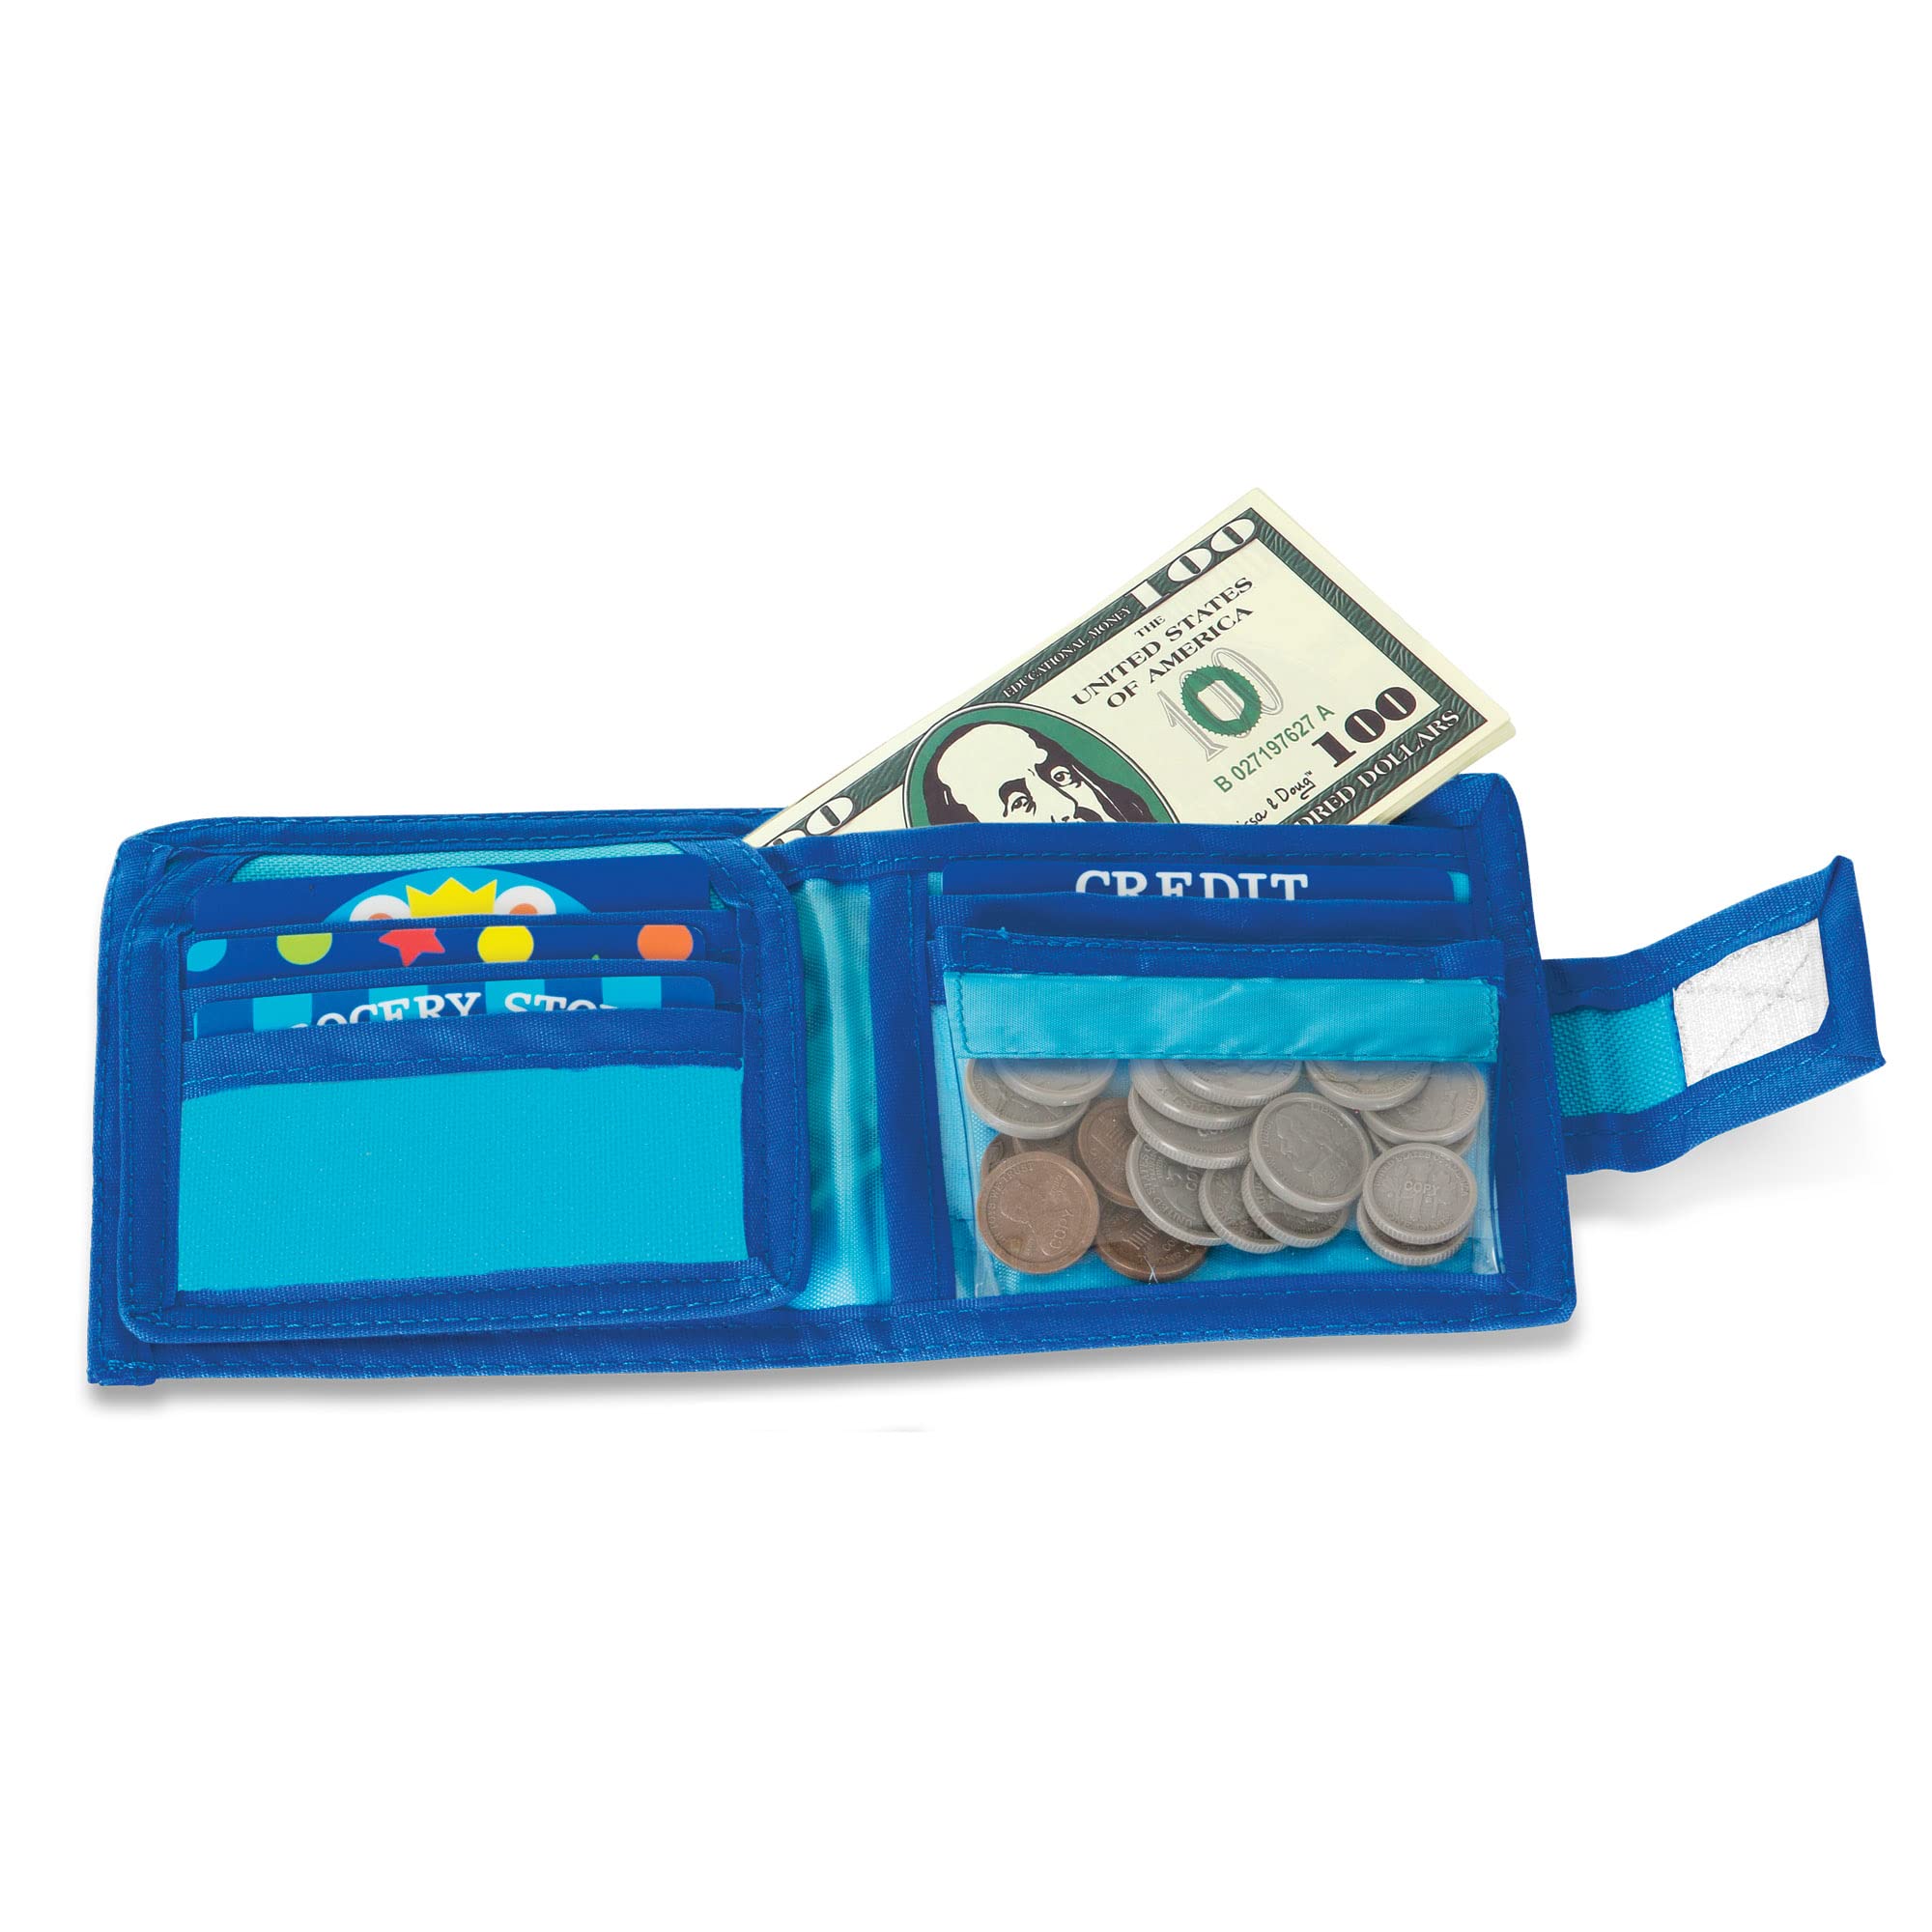 Melissa & Doug Pretend-to-Spend Toy Wallet With Play Money and Cards (45 pcs) , Blue - Shopping Toys, Play Wallet, Pretend Credit Cards For Kids Ages 3+